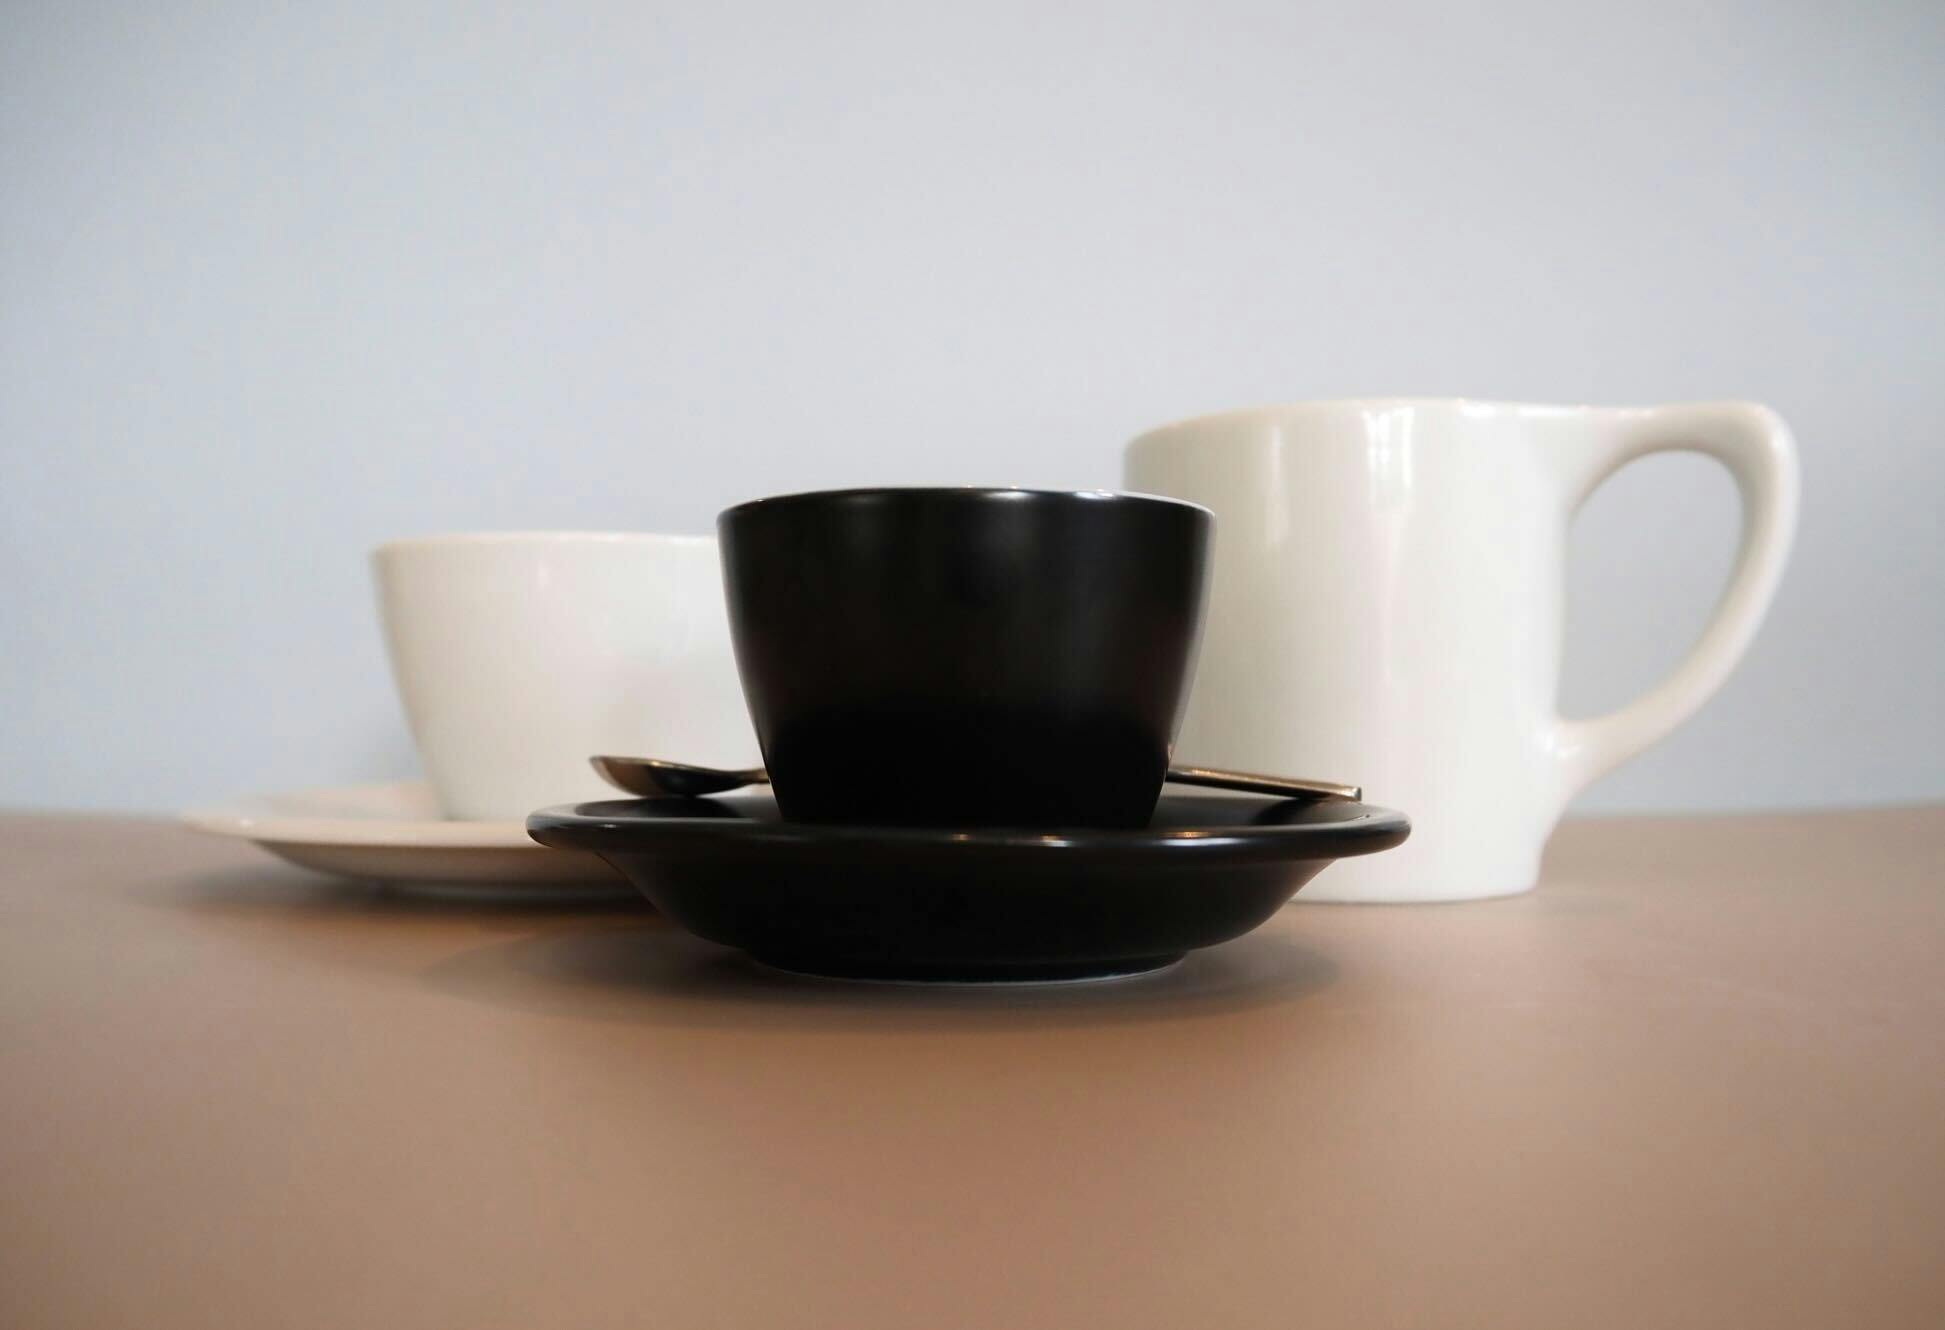 An assortment of white coffee cups with a black espresso cup in the front.